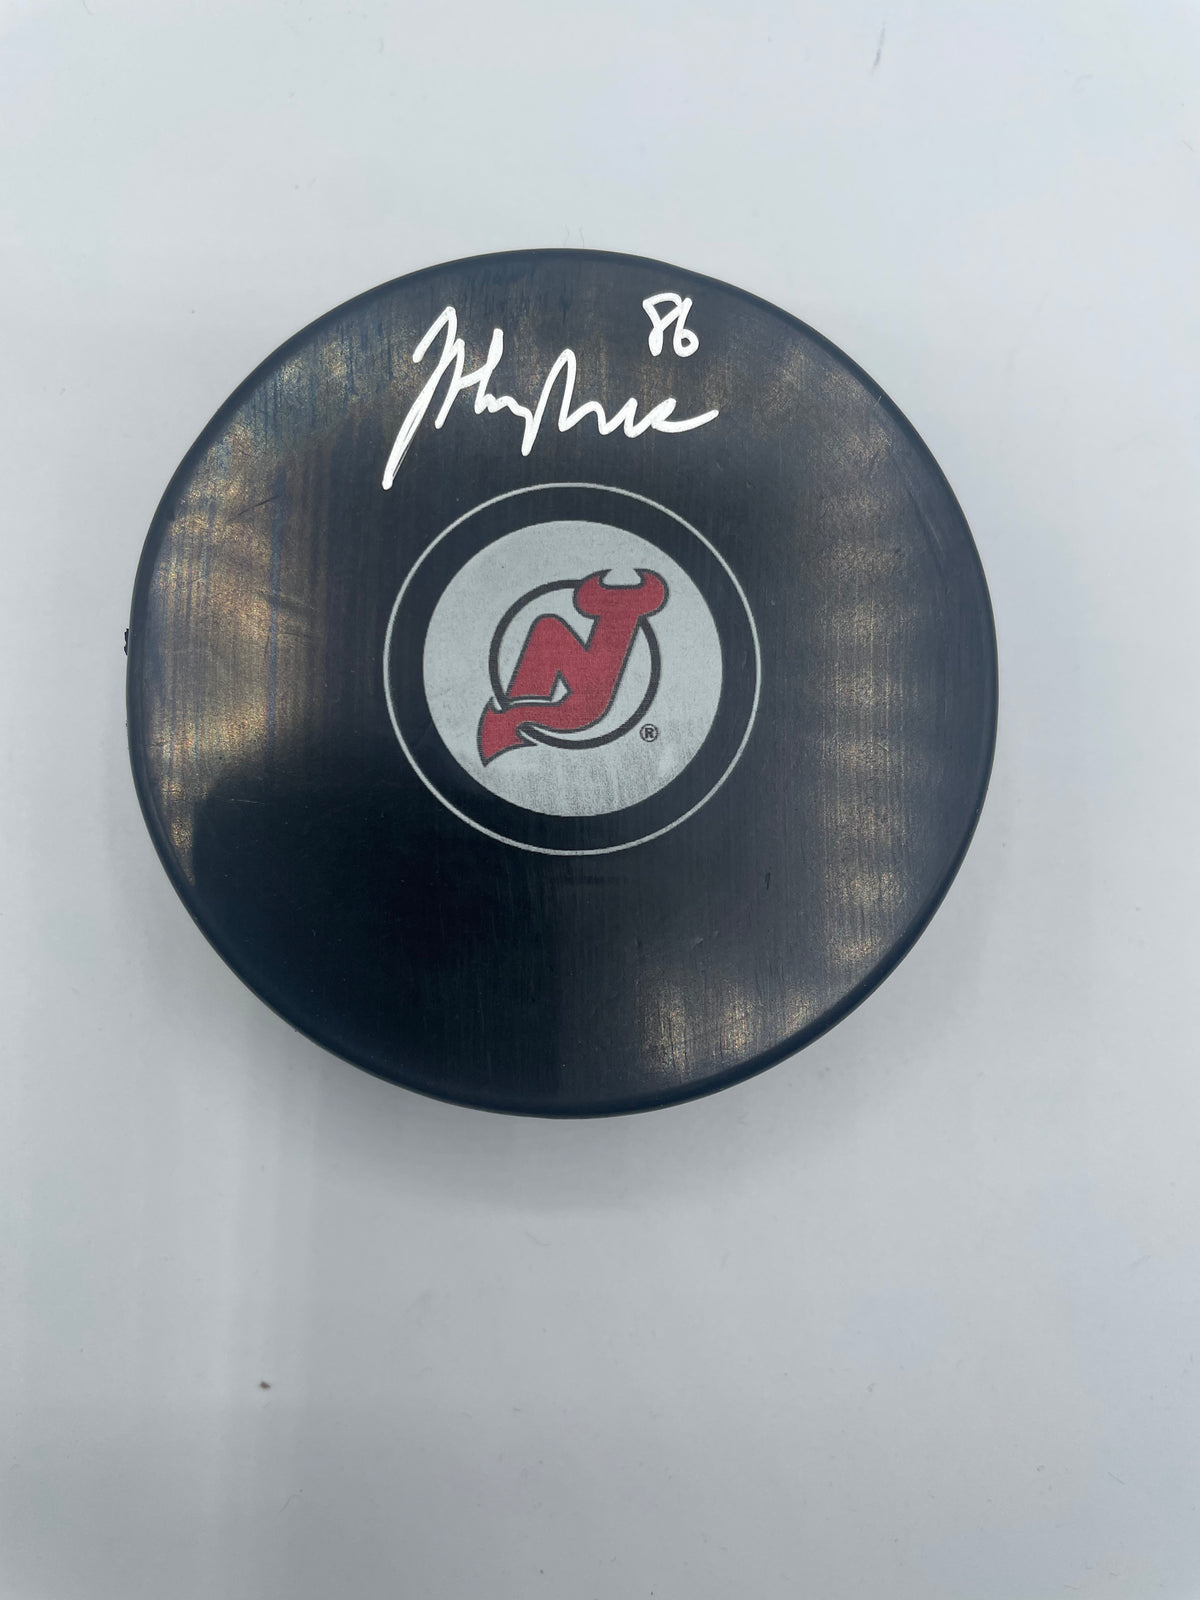 Jack Hughes New Jersey Devils Autographed Baseball - NHL Auctions Exclusive  - NHL Auctions